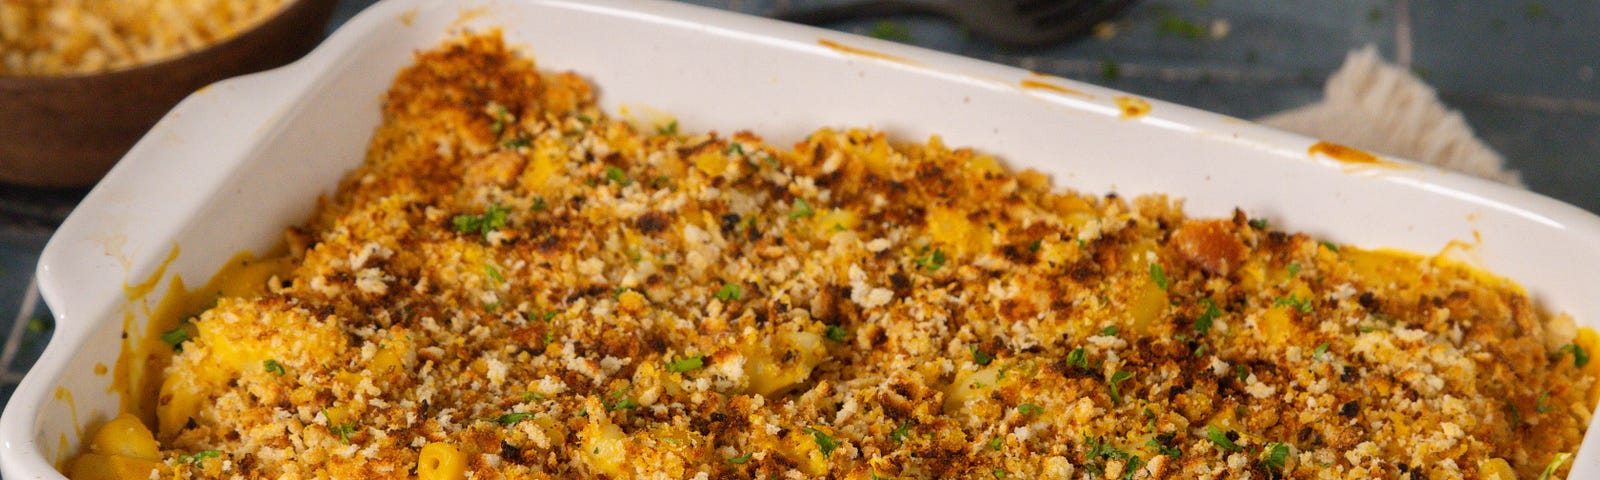 Baked Vegan Mac and Cheese in a baking dish